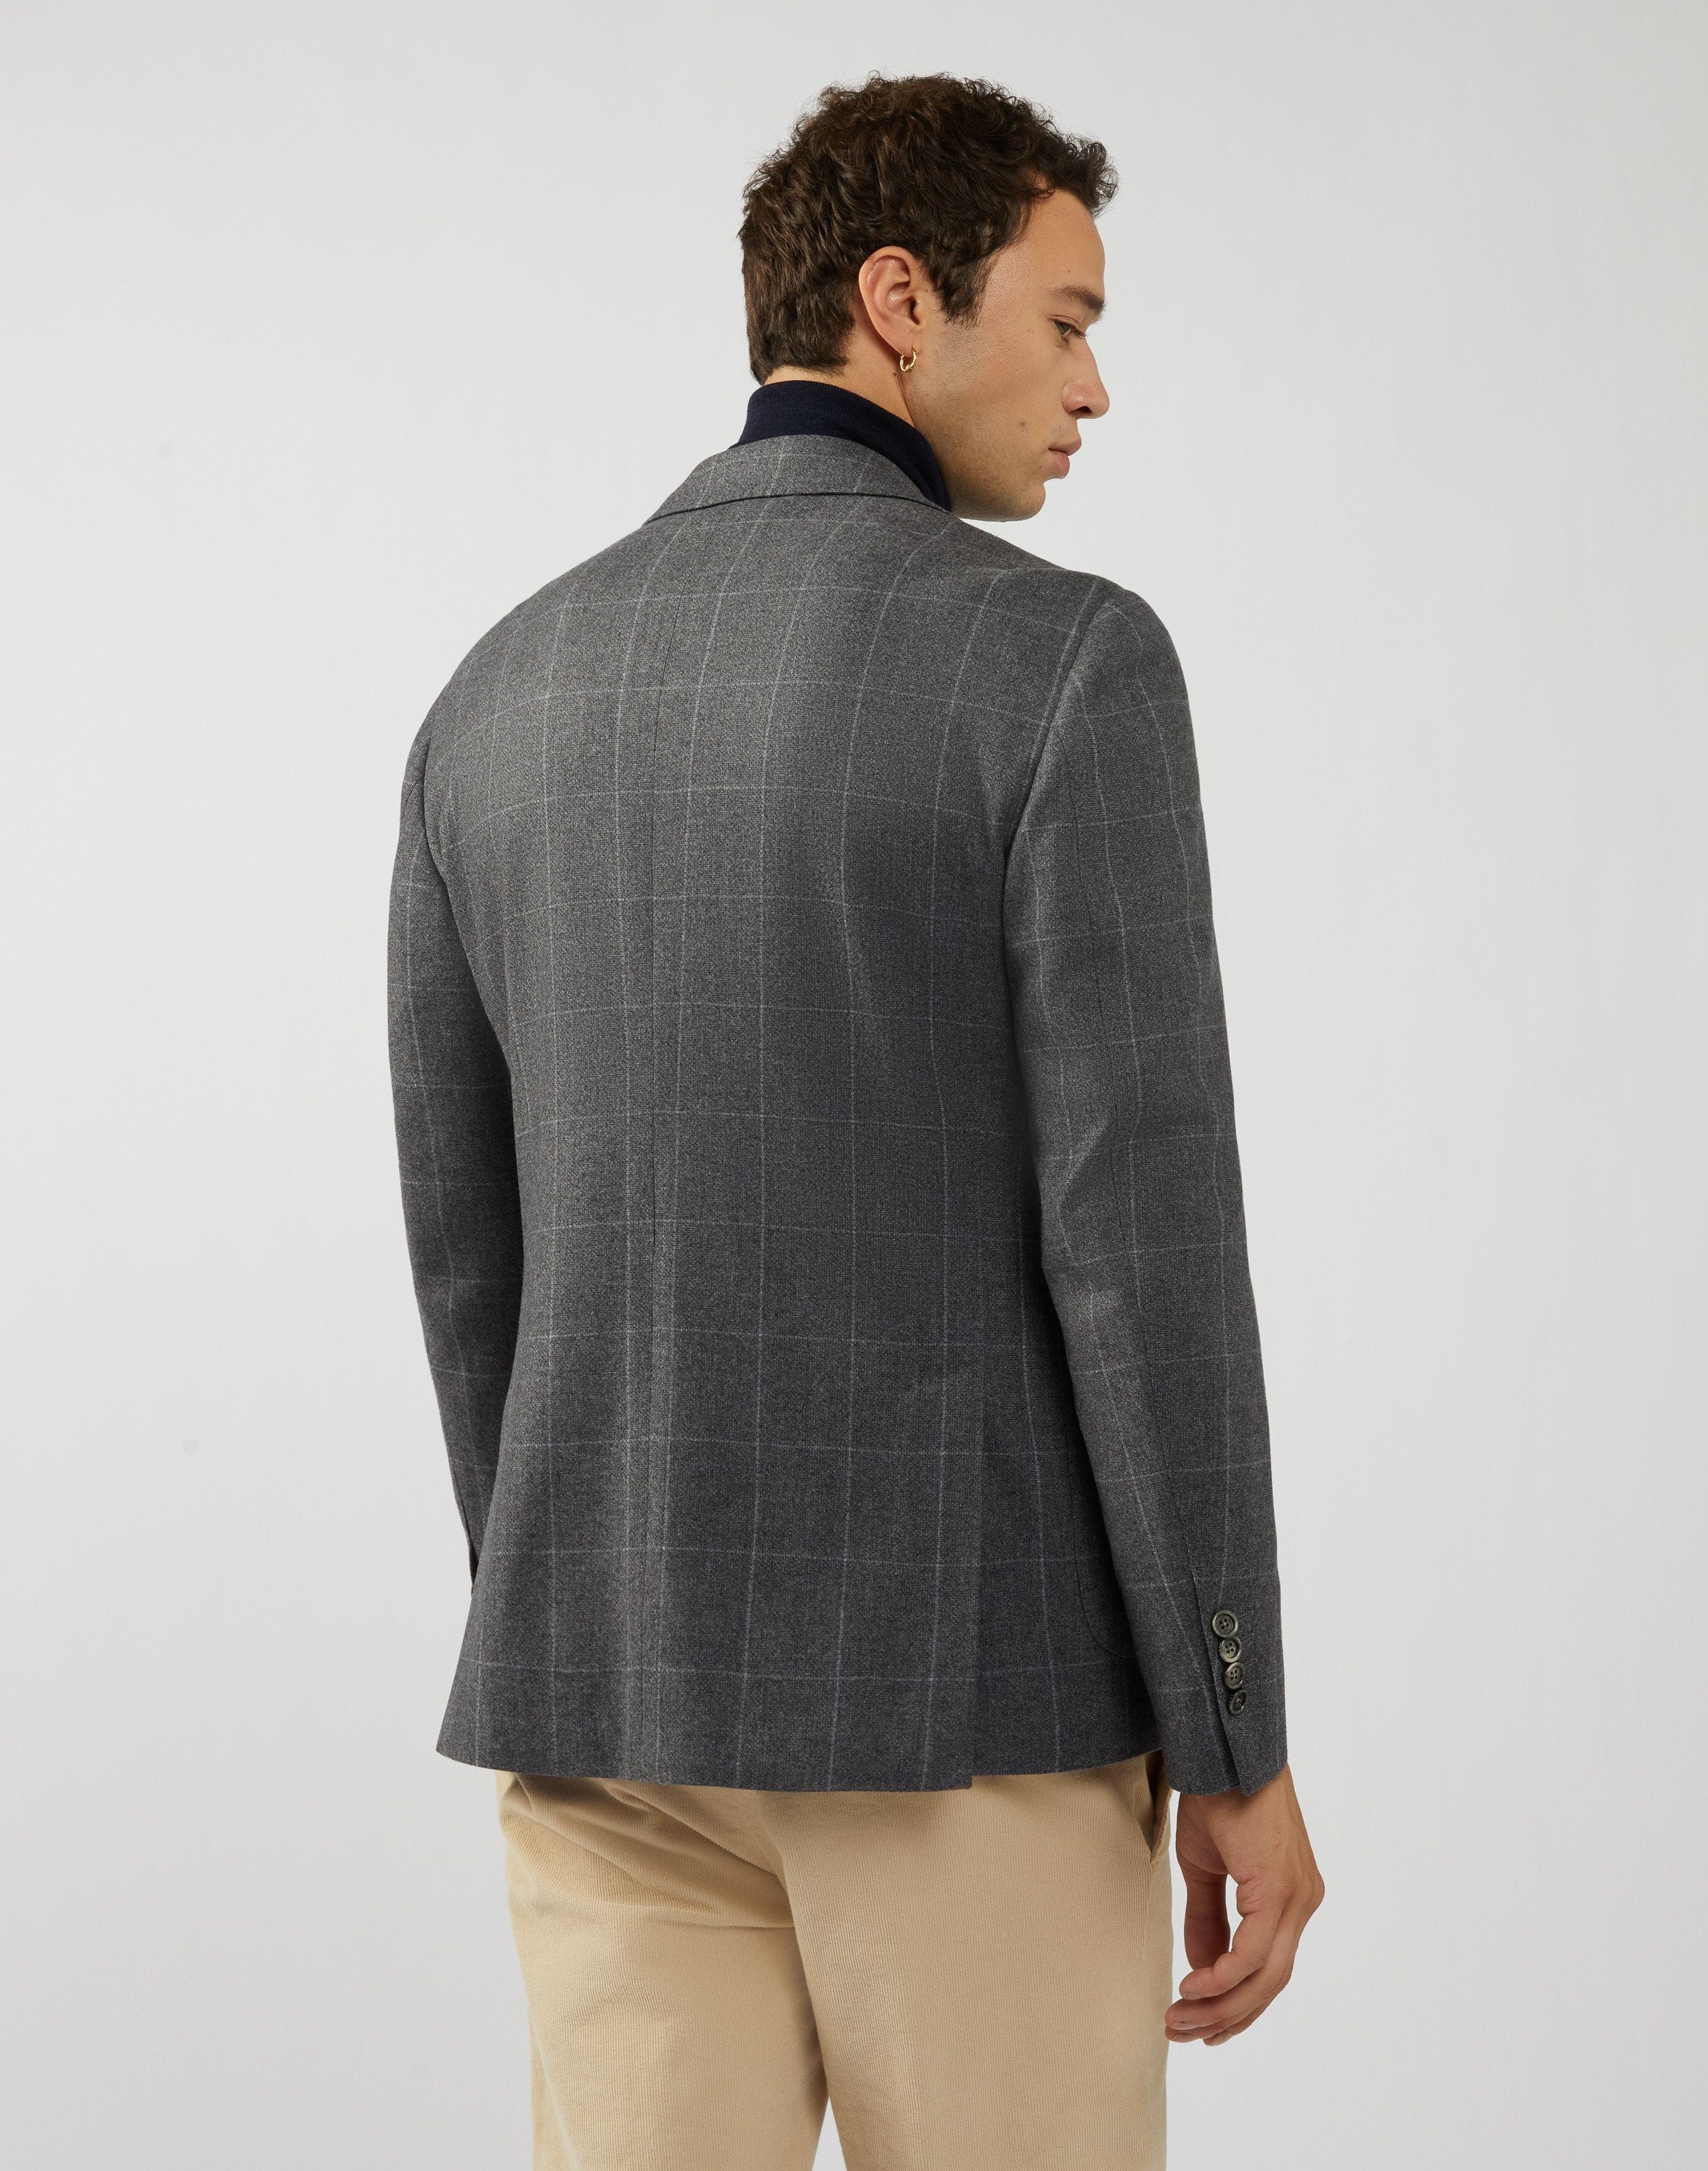 Jacket in grey wool and cashmere - Easy